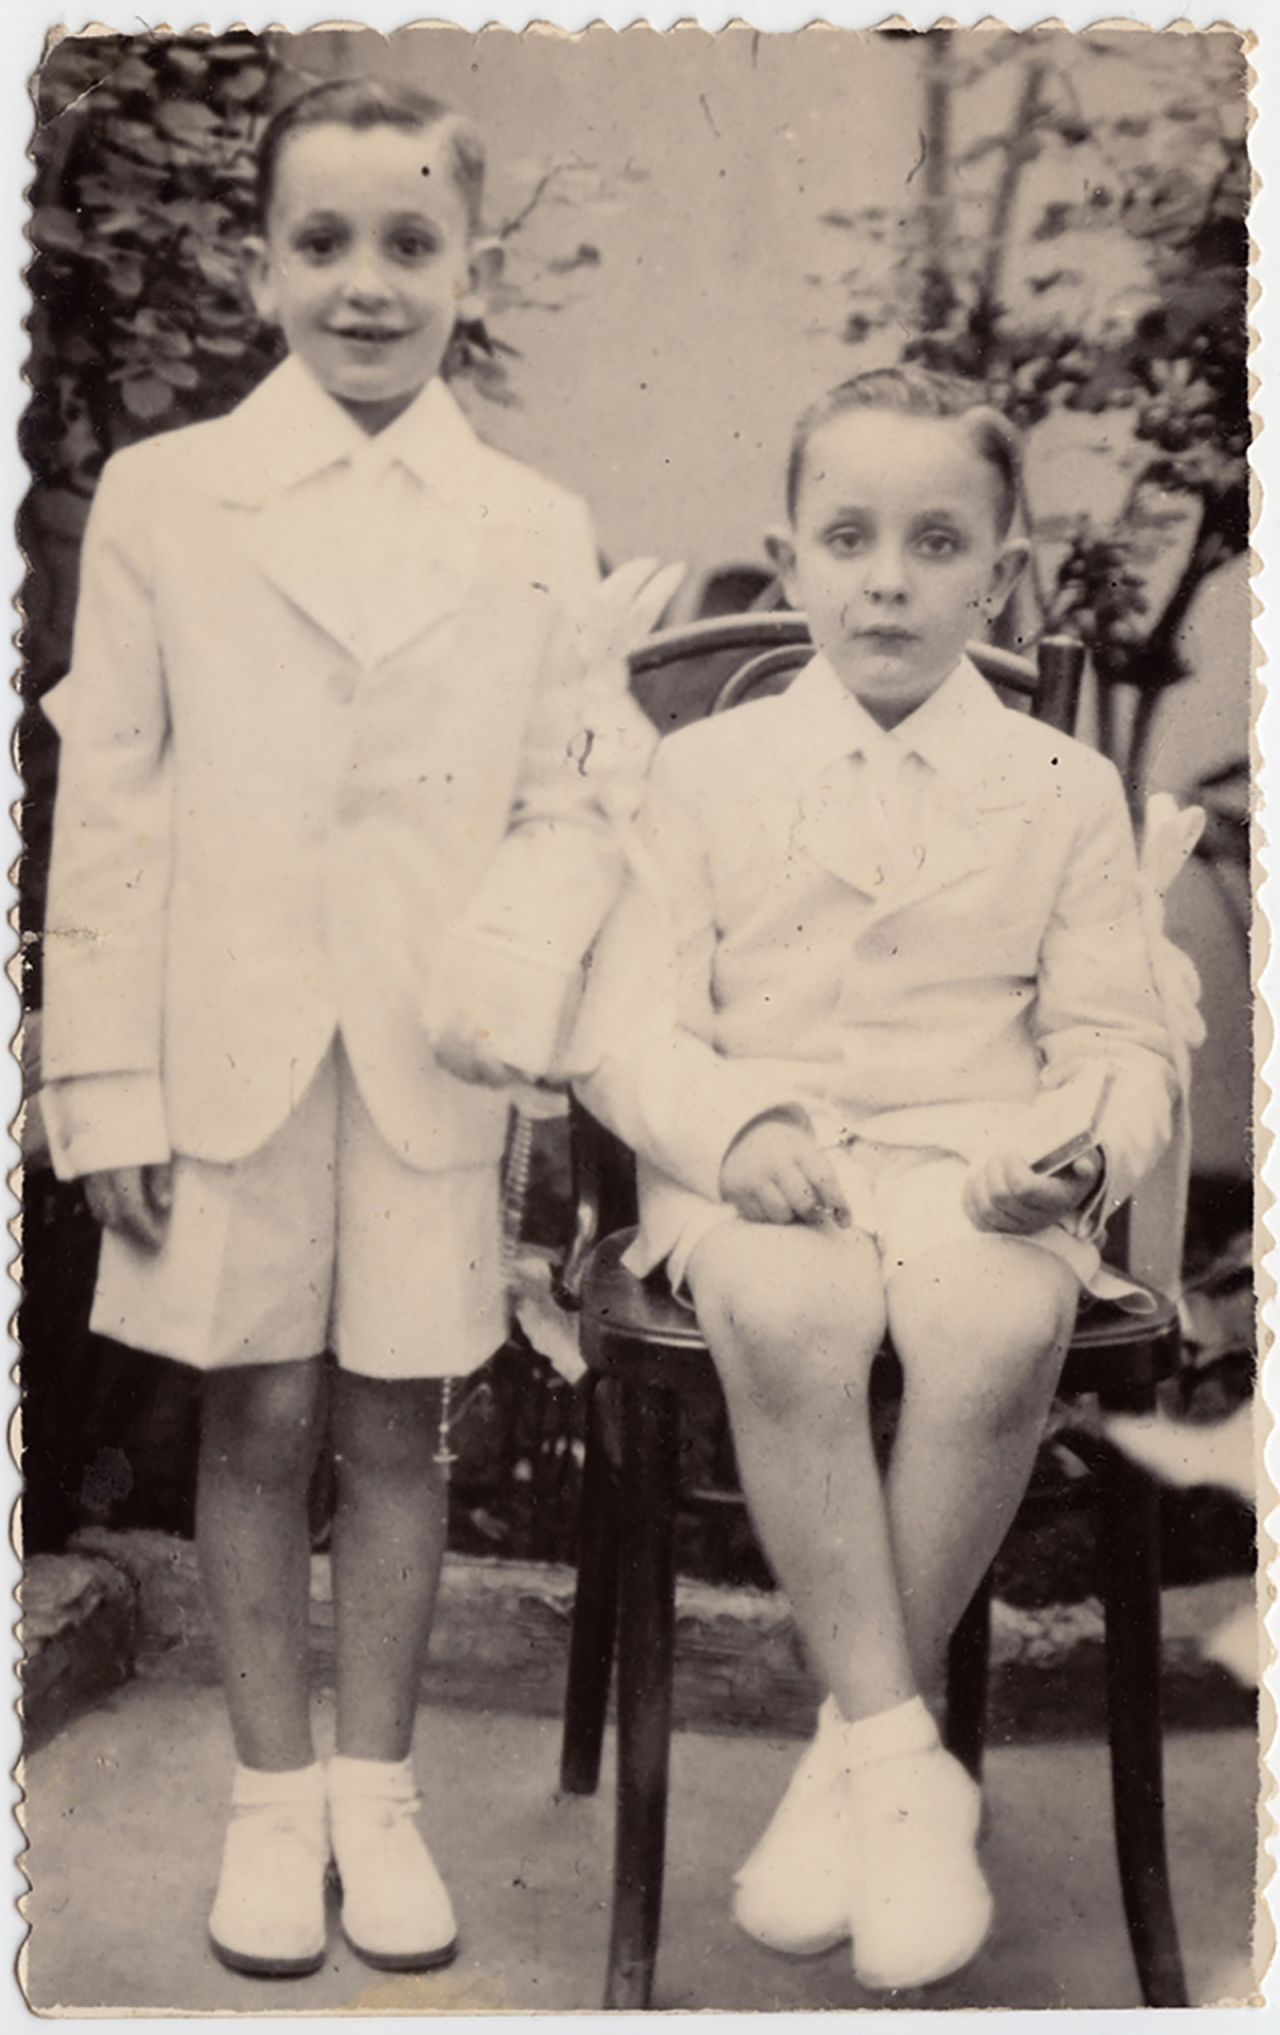 Francis, seen at left with his brother Oscar, was born on December 17, 1936. He was the eldest child of Mario and Regina Bergoglio, Italian immigrants in Argentina.